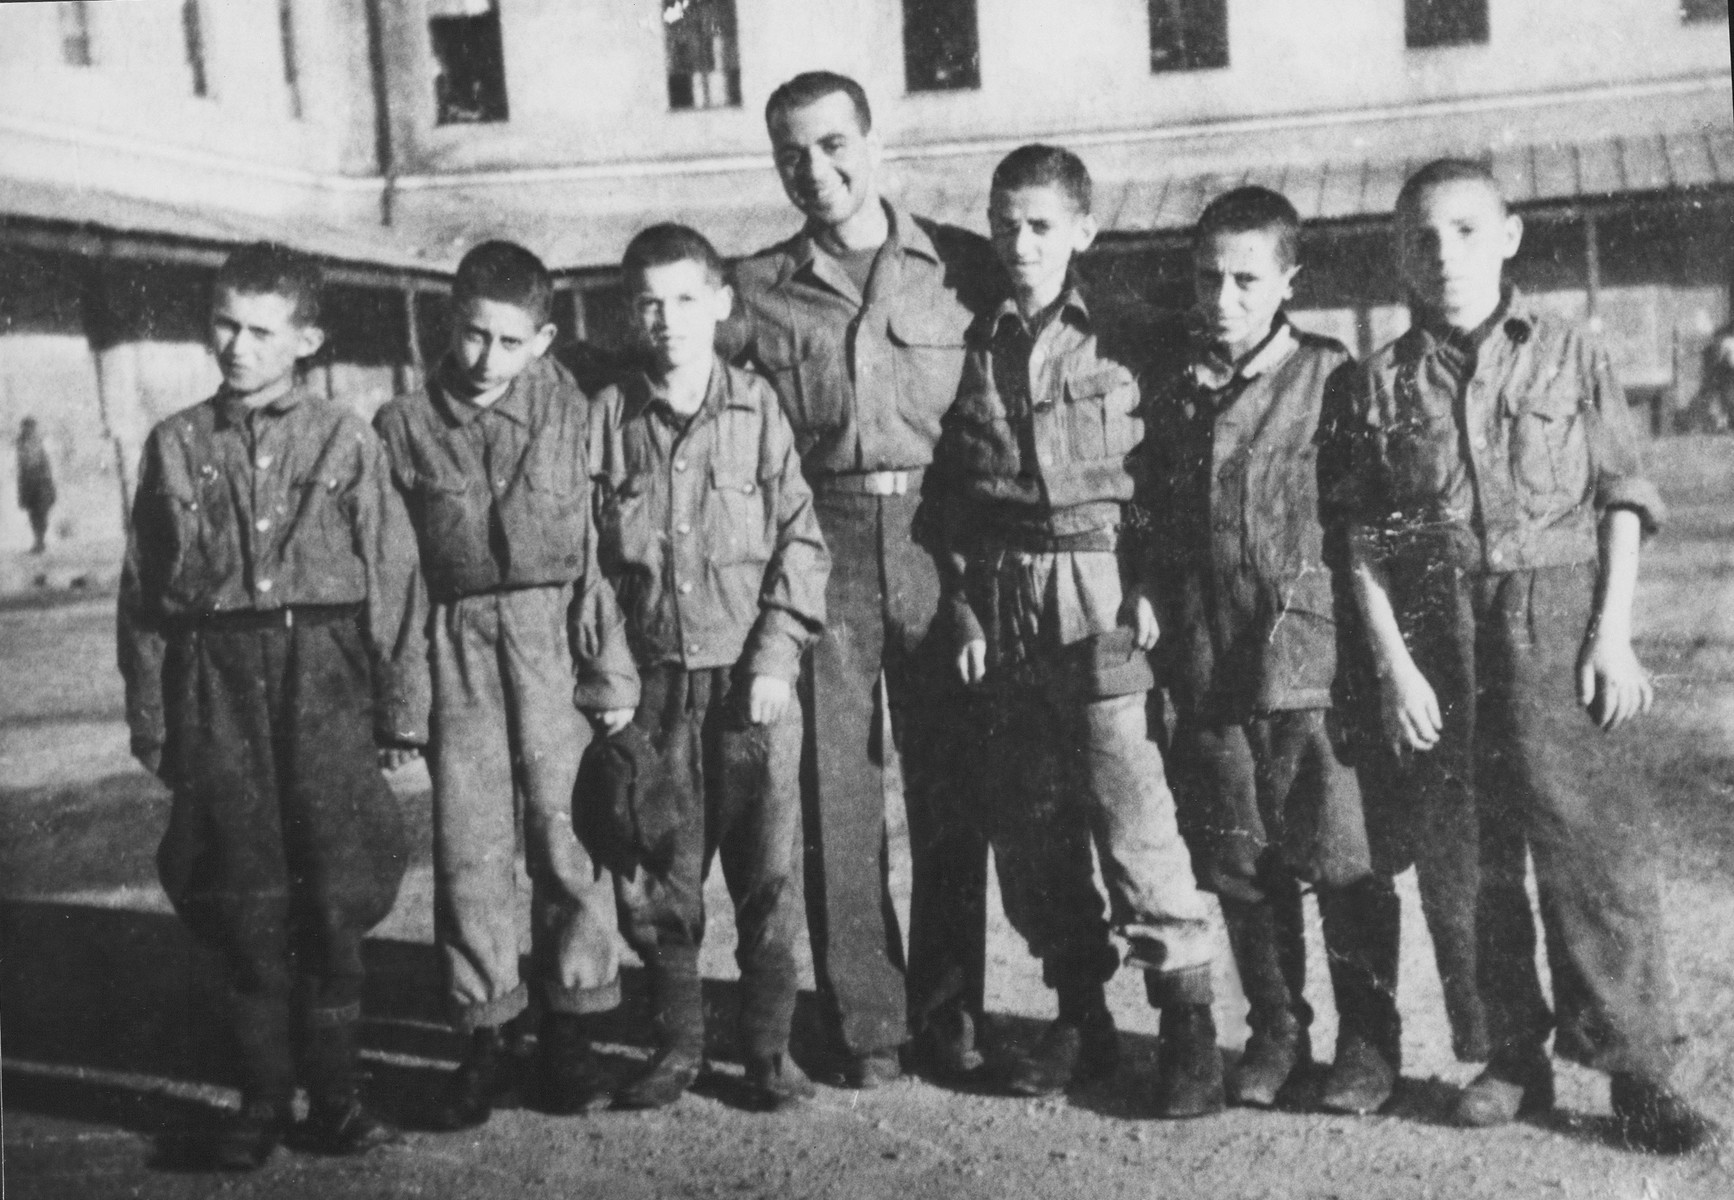 An American Jewish liberator poses with six children in the Gunskirchen concentration camp.

Pictured in the center is Max Wolfson.  Meir Gecht is one of the children.